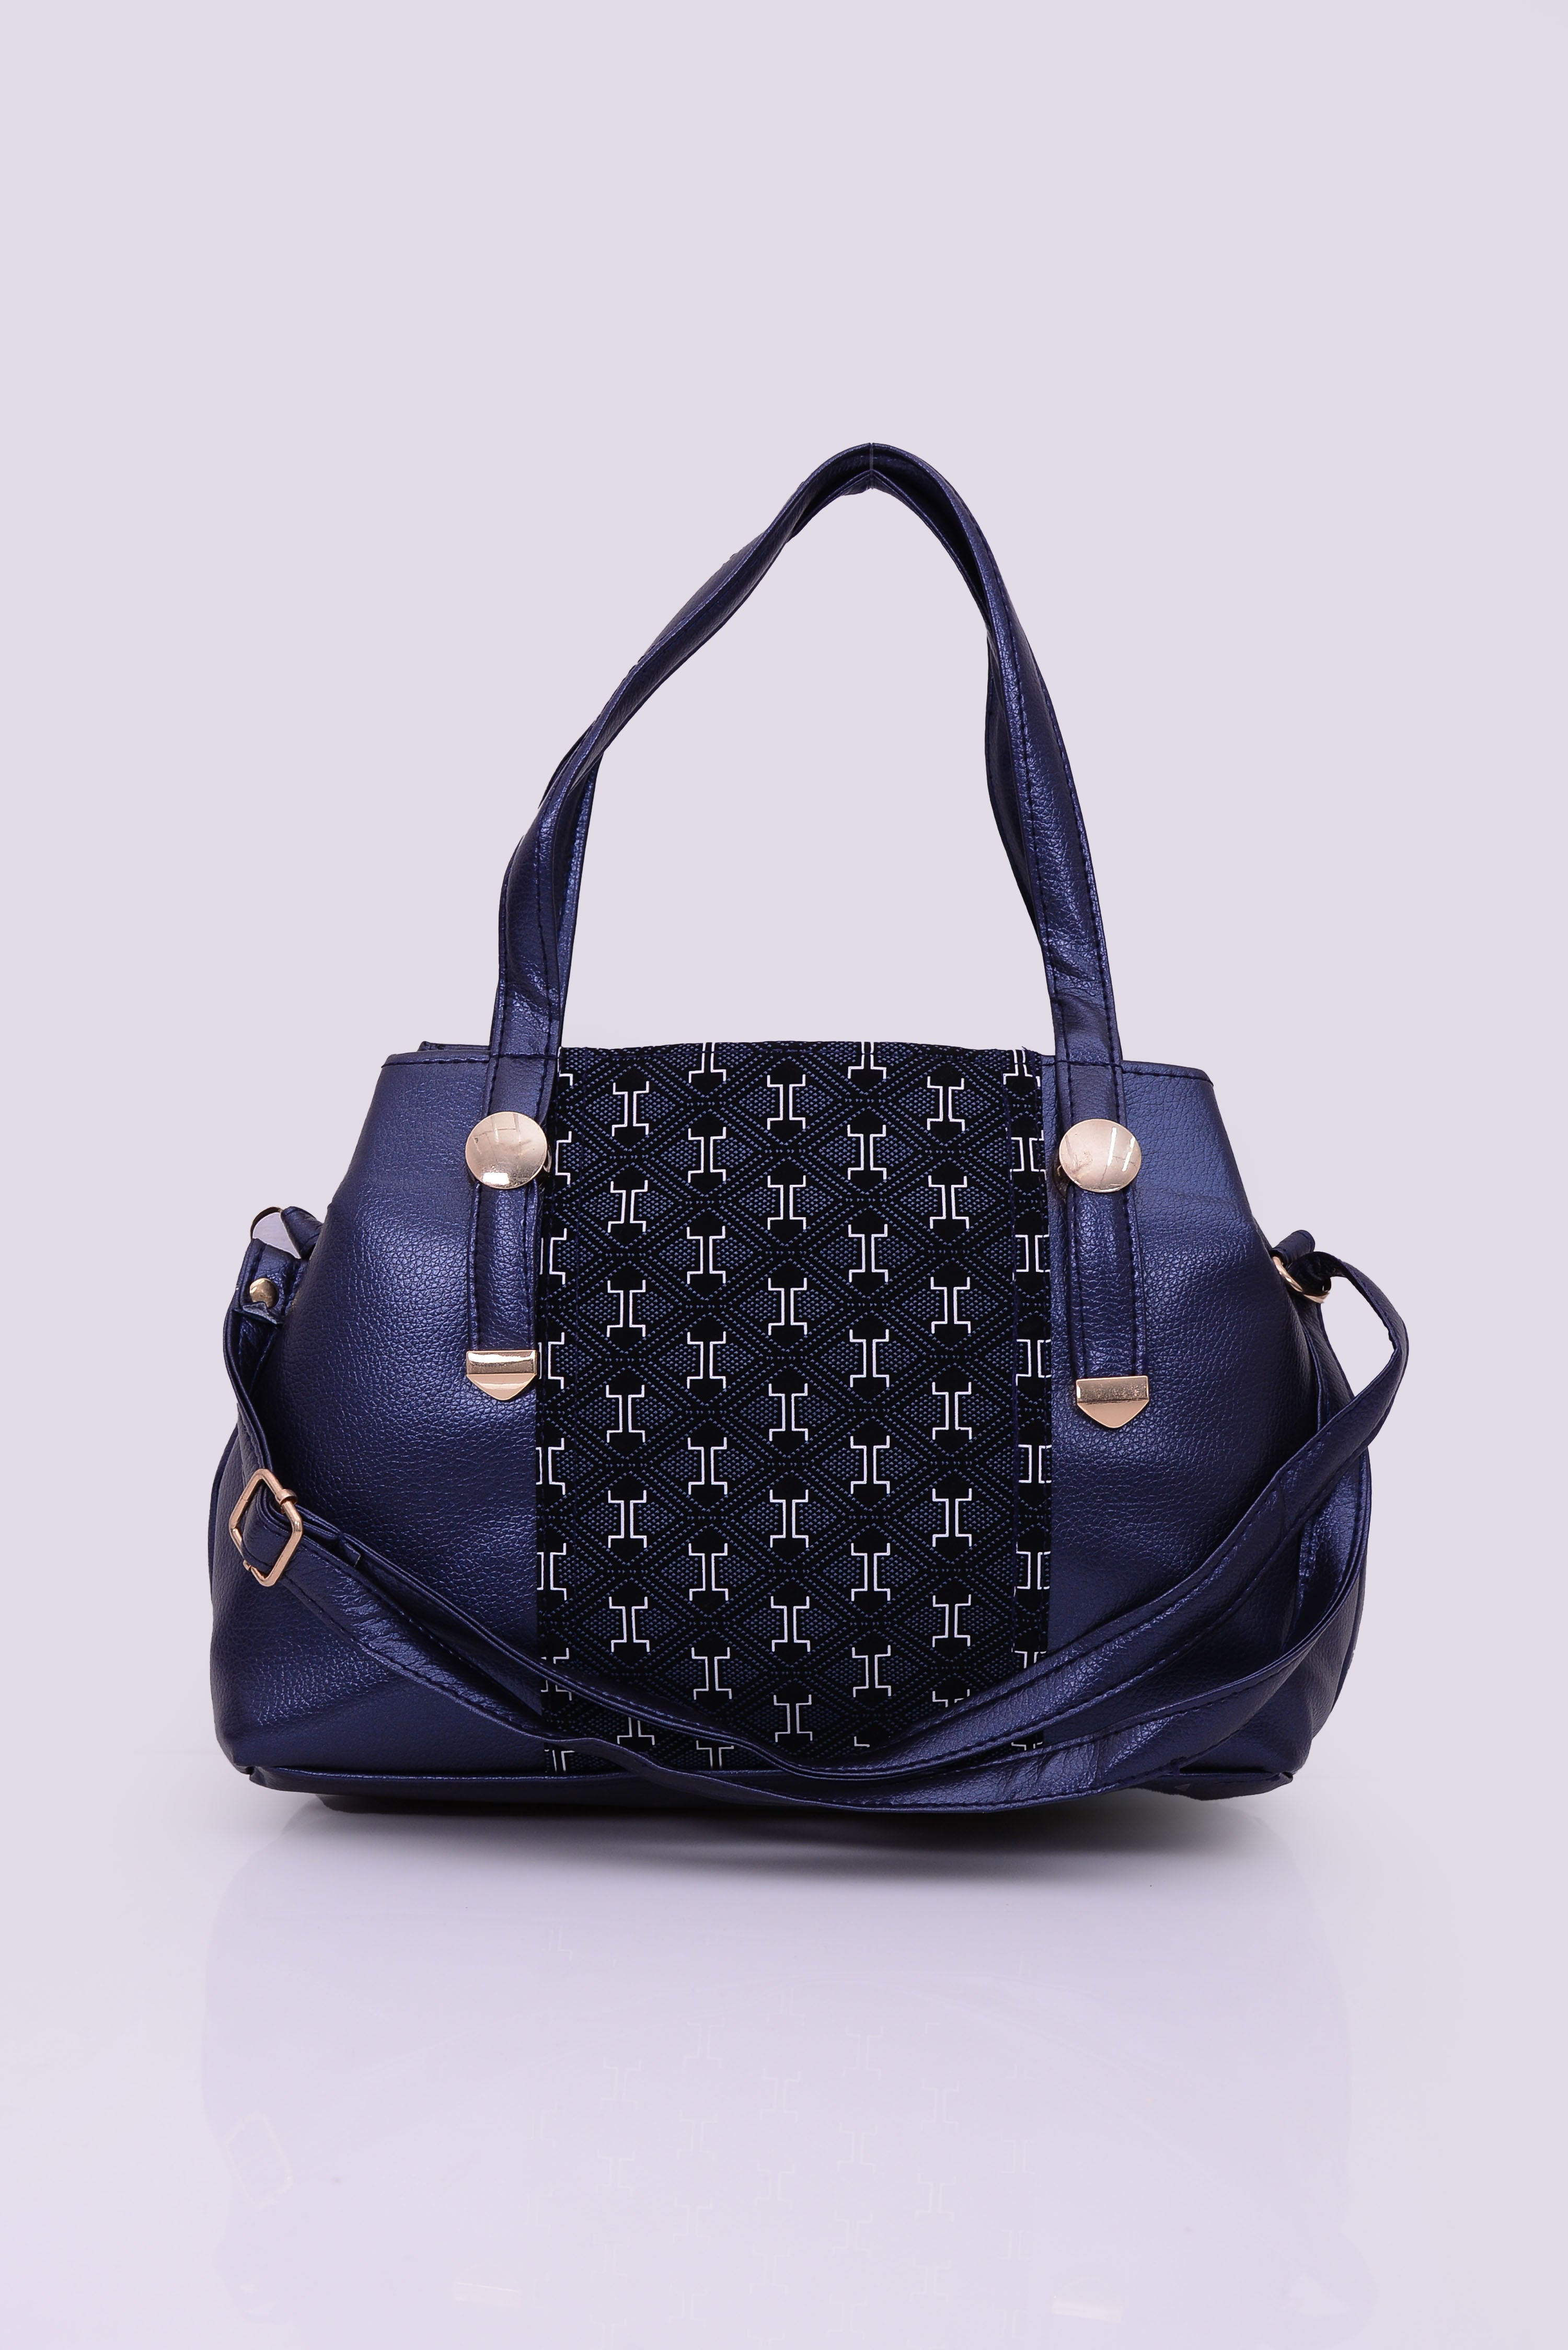 Hand Bags for Women |Ladies Purse I30-12 Navy